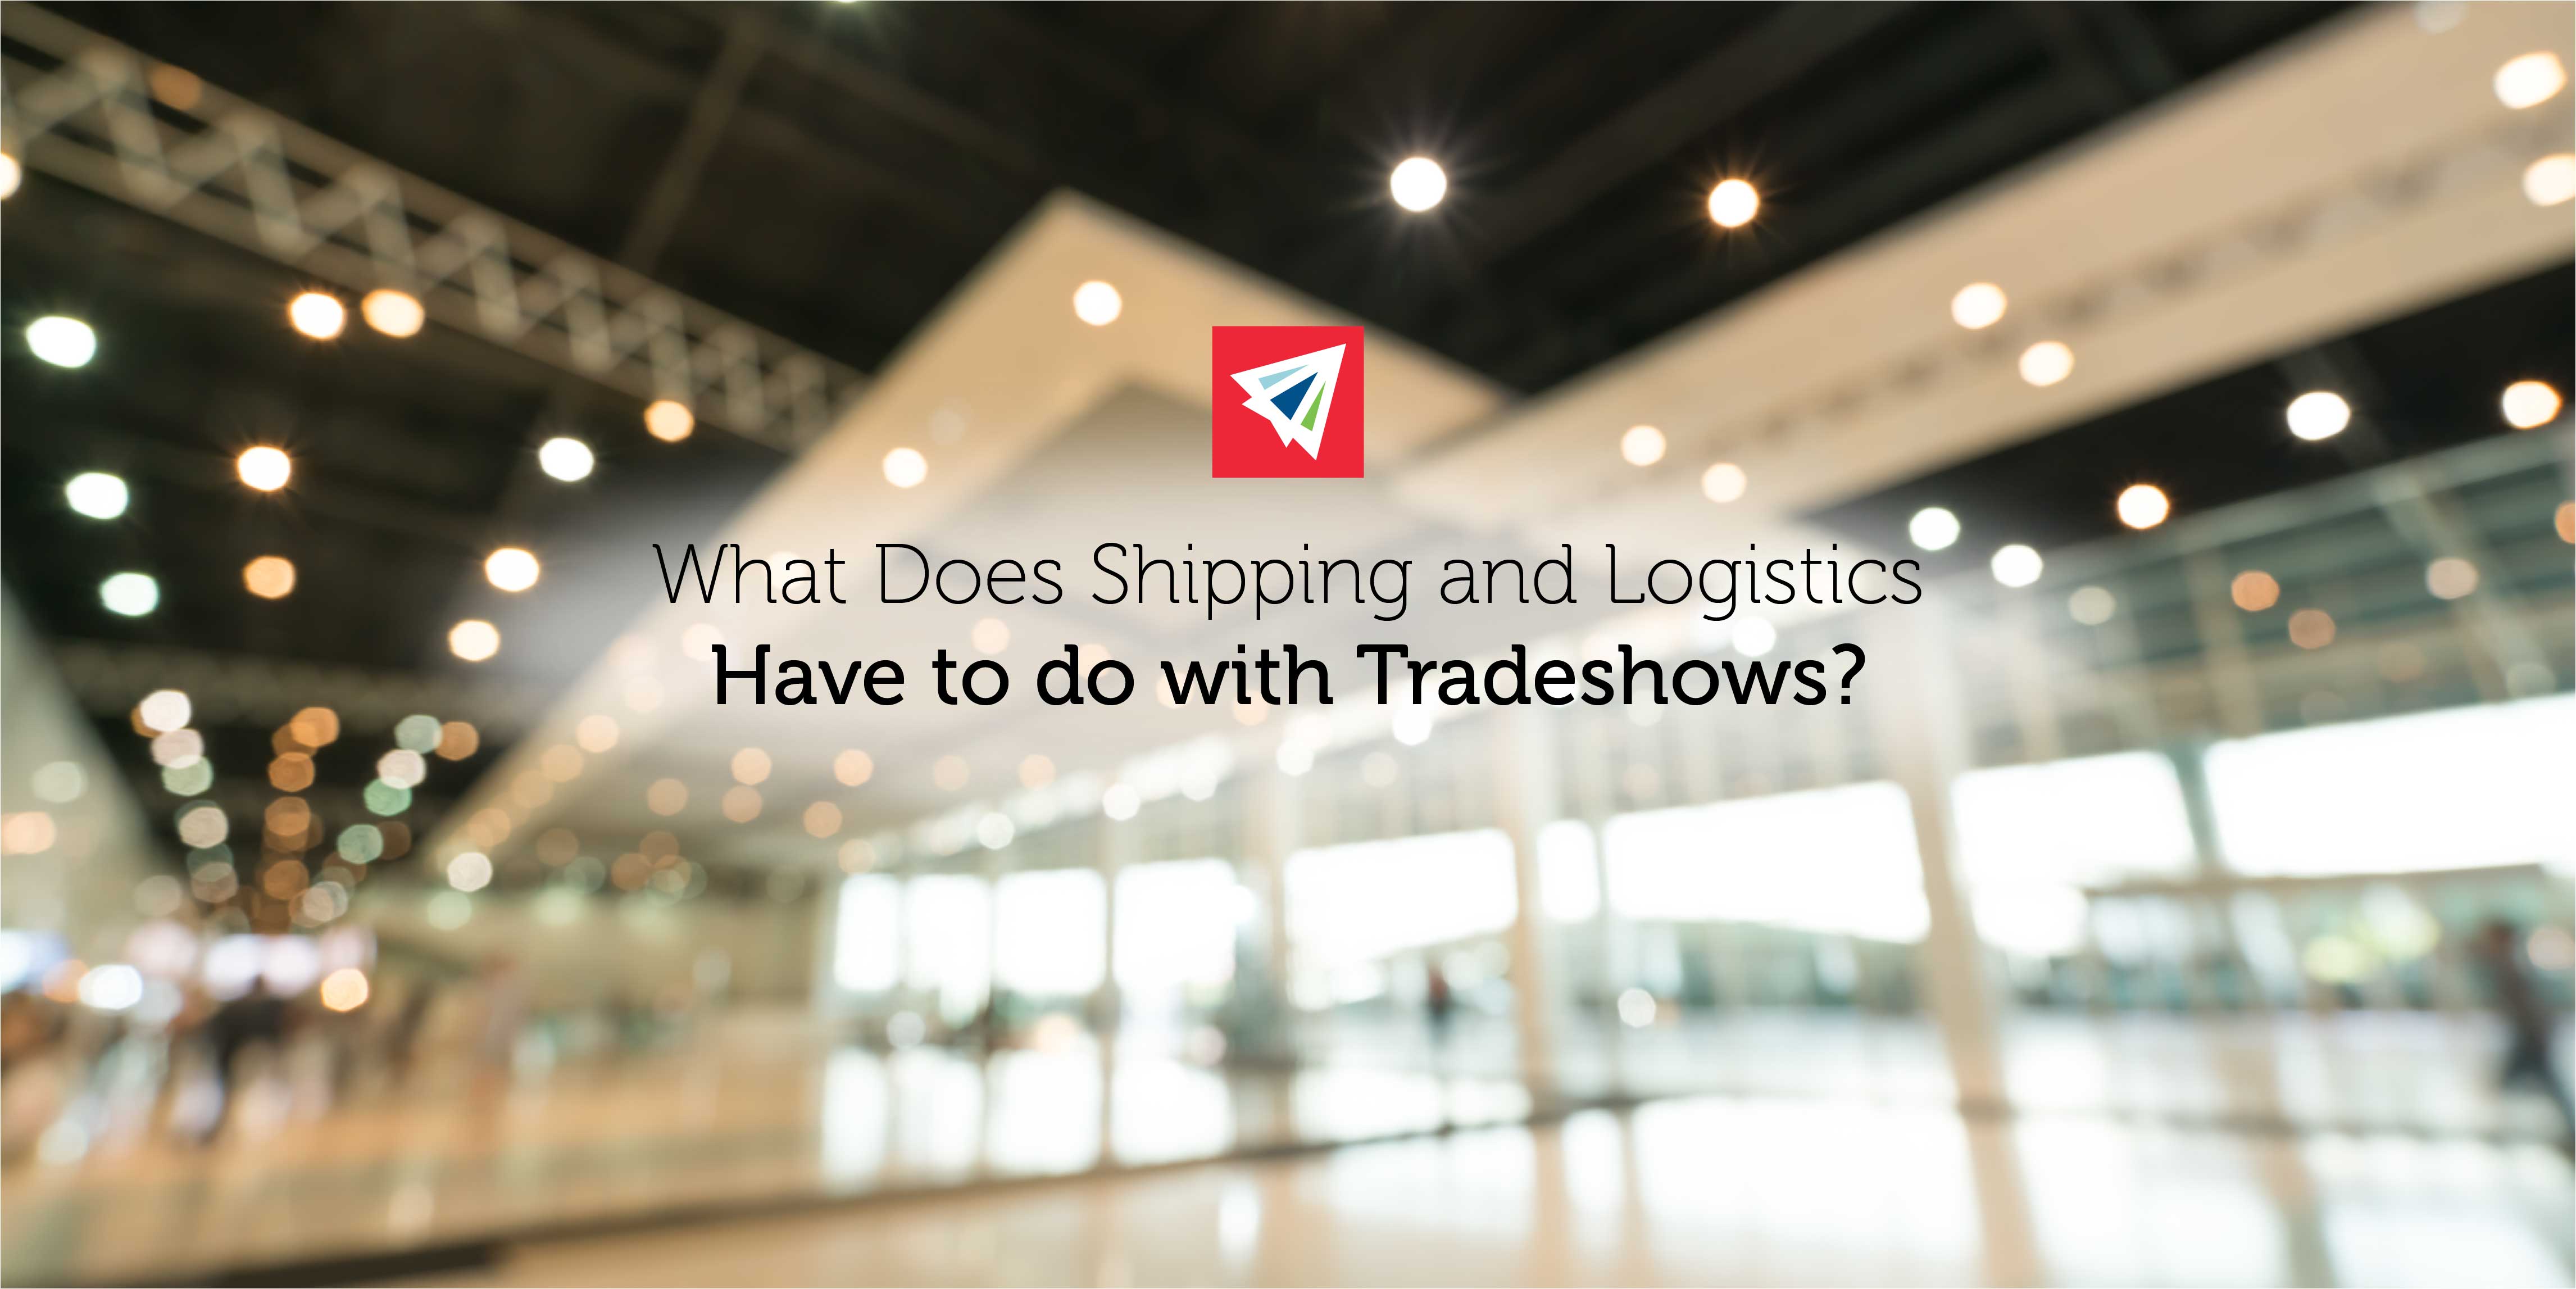 What Does Shipping and Logistics Have to do with Tradeshows